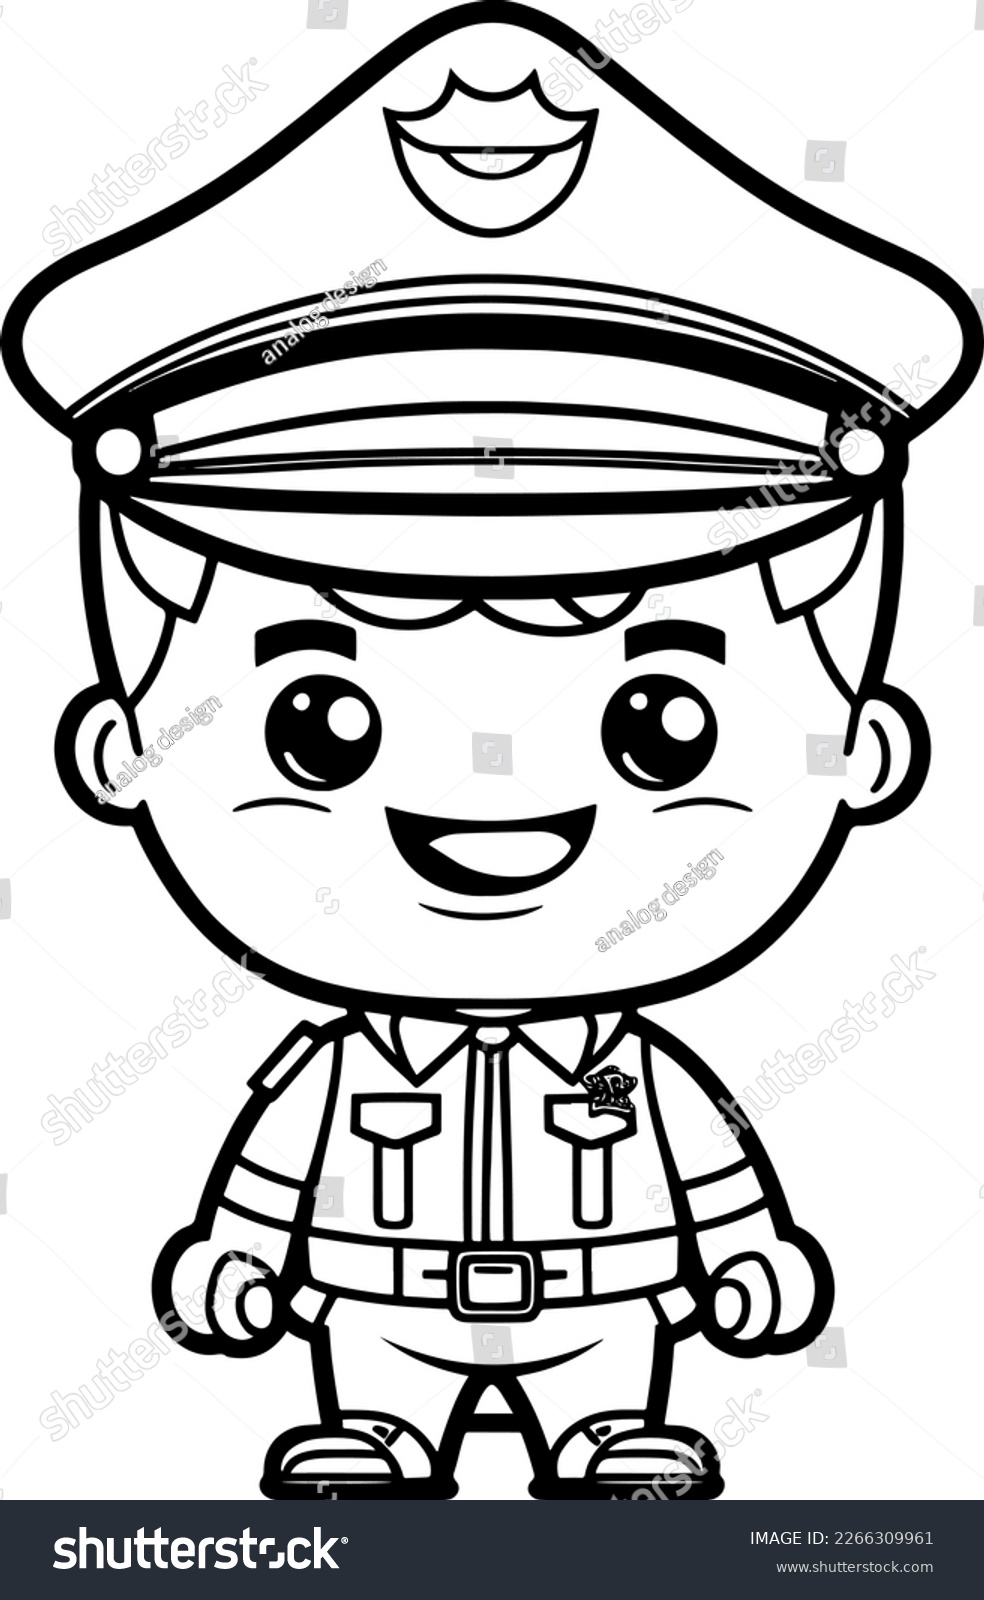 SVG of cute cartoon Cheerful Police Officer svg vector graphic svg